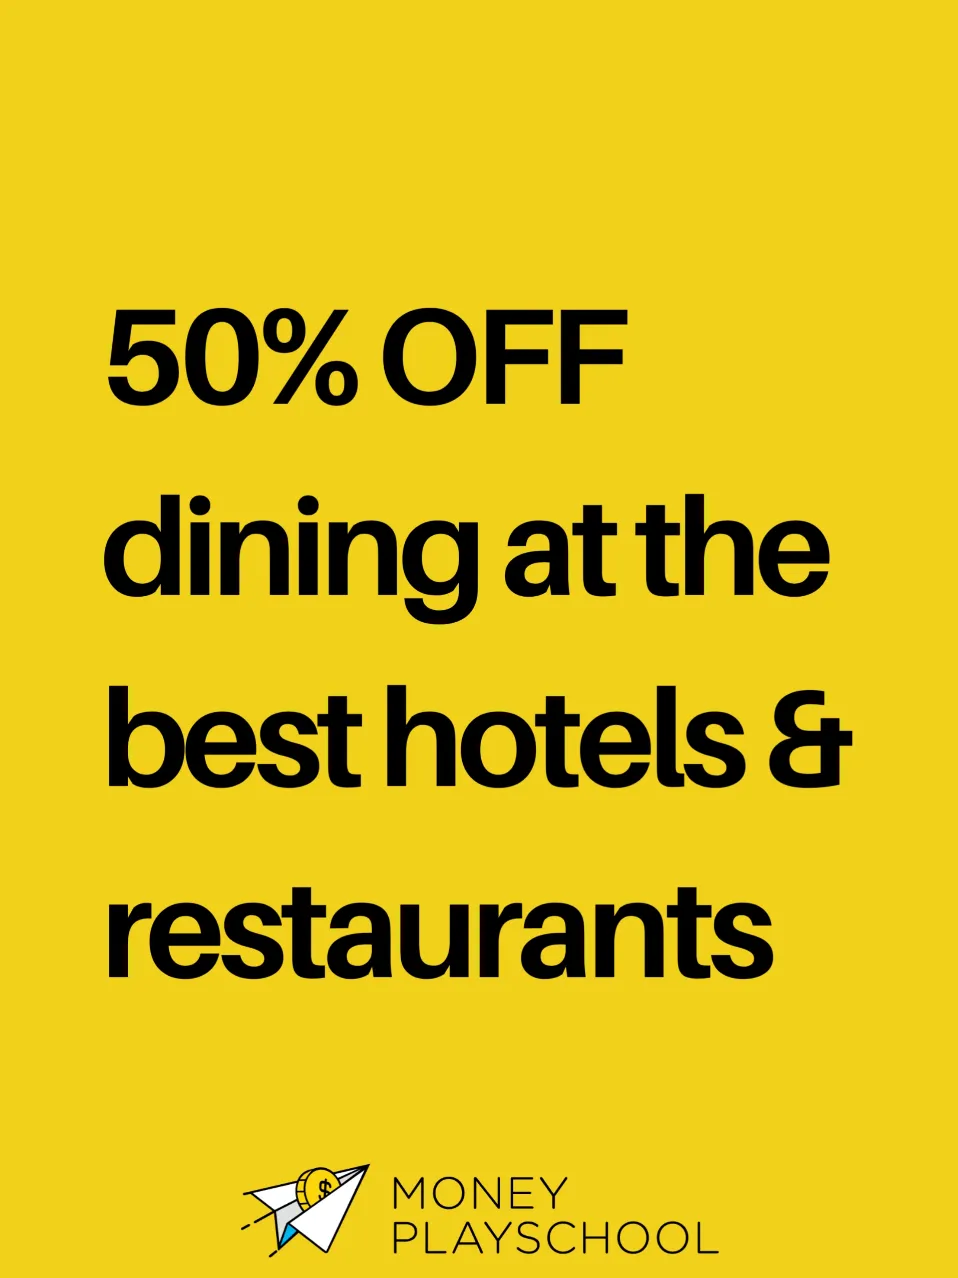 50% Discount At The Best Restaurants & Hotels's images